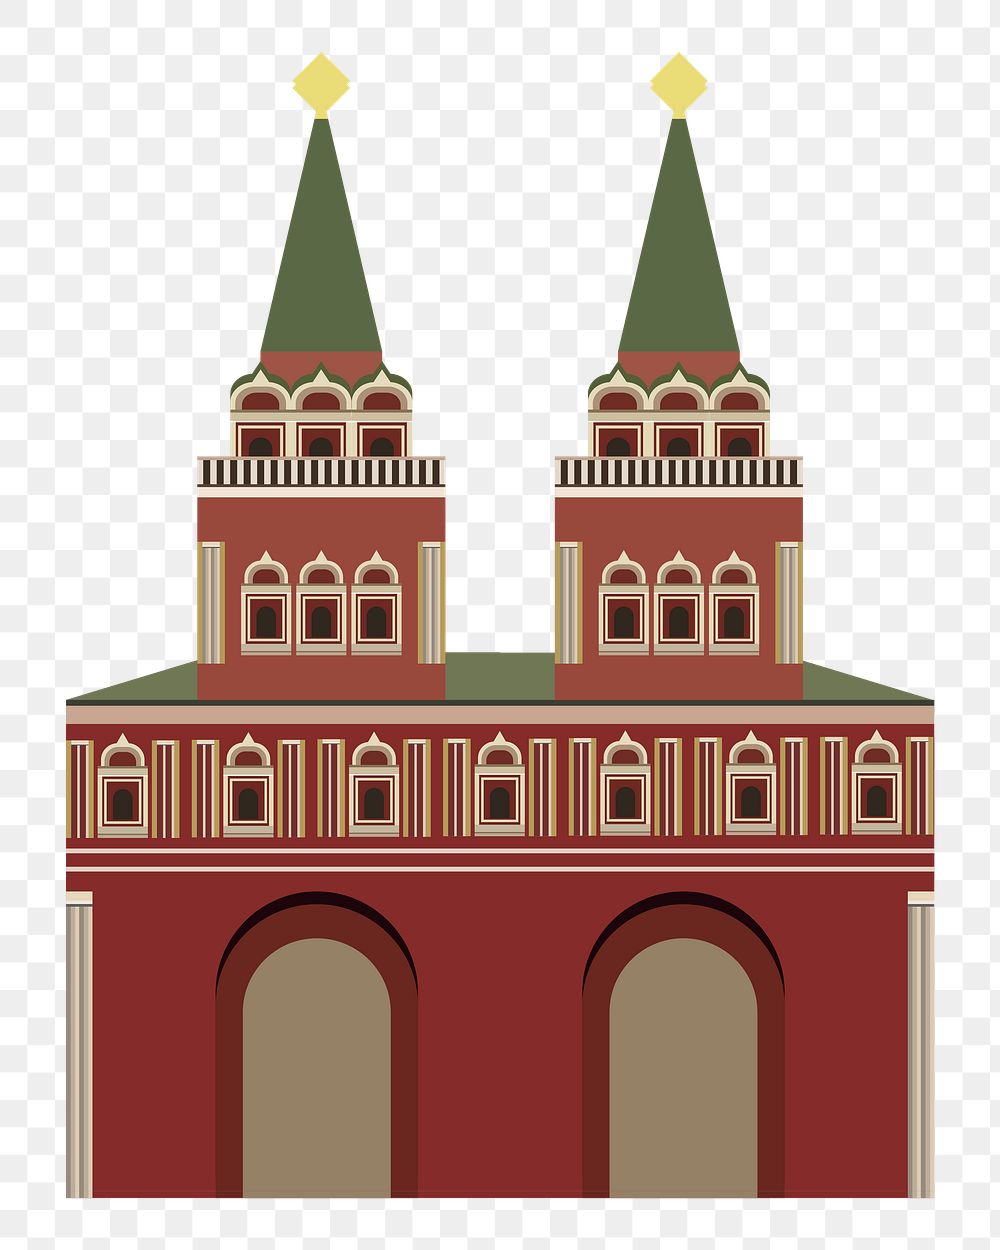 Iberian Gate and Chapel png illustration, transparent background